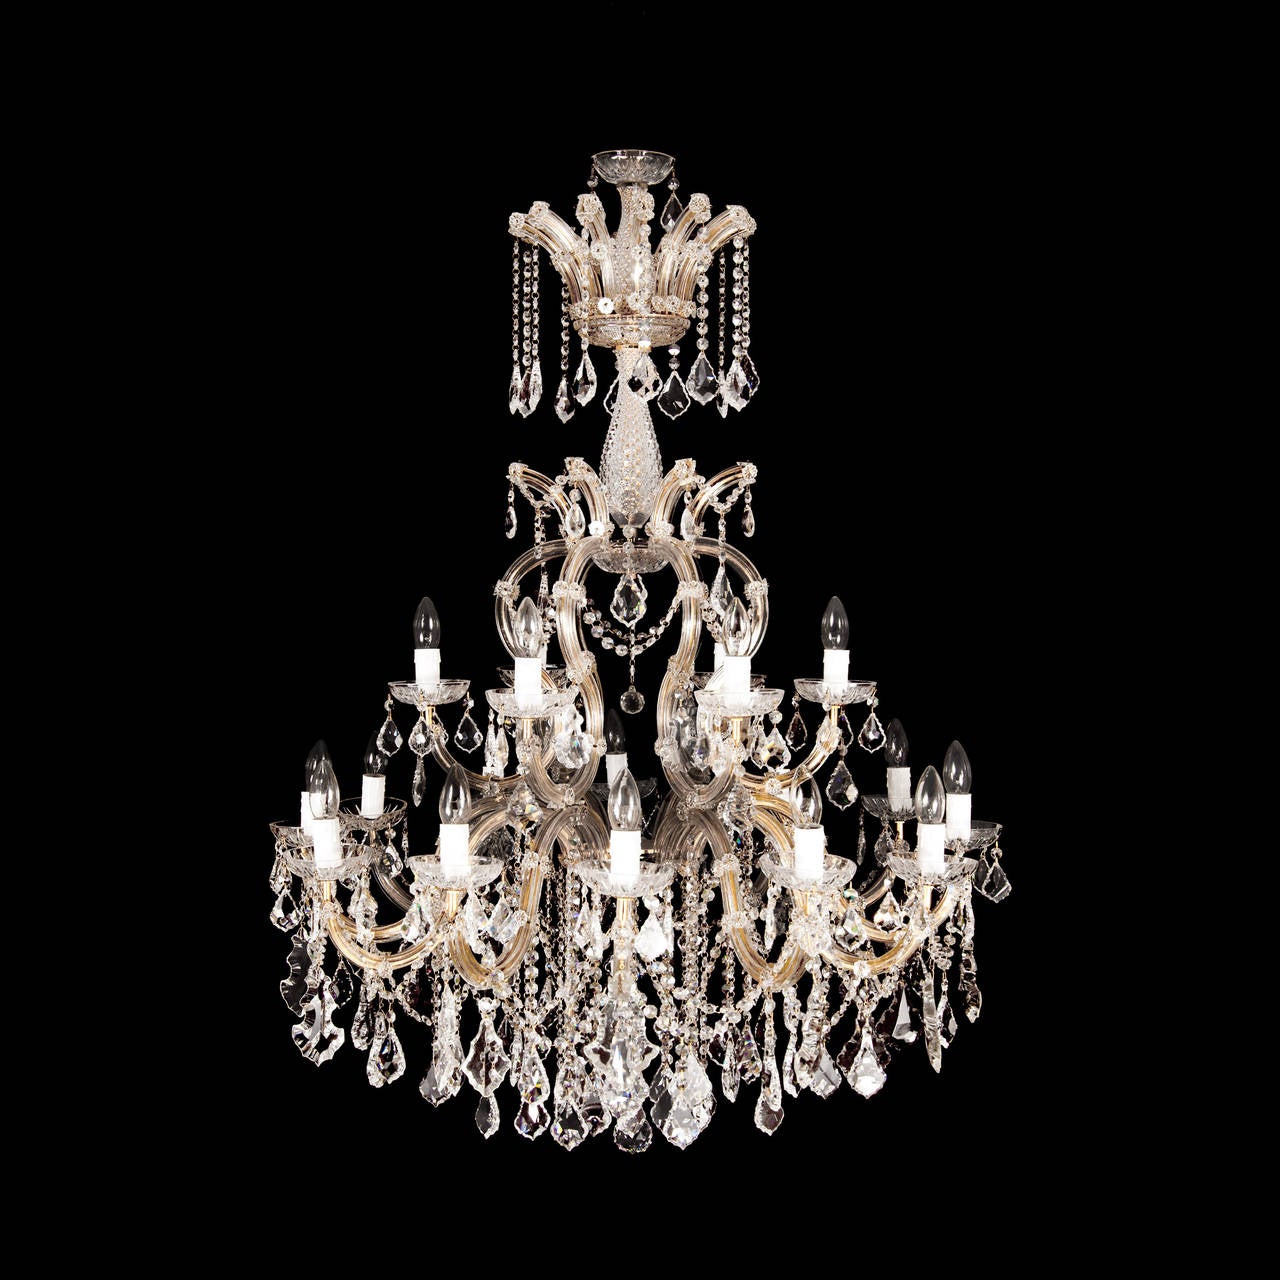 These stunning chandeliers exemplify the very finest of Bohemain glasswork. Each chandelier has eighteen individual branches of single lights with scones, which all feature hand cut teardrop shaped crystals that delicately hang below each light.